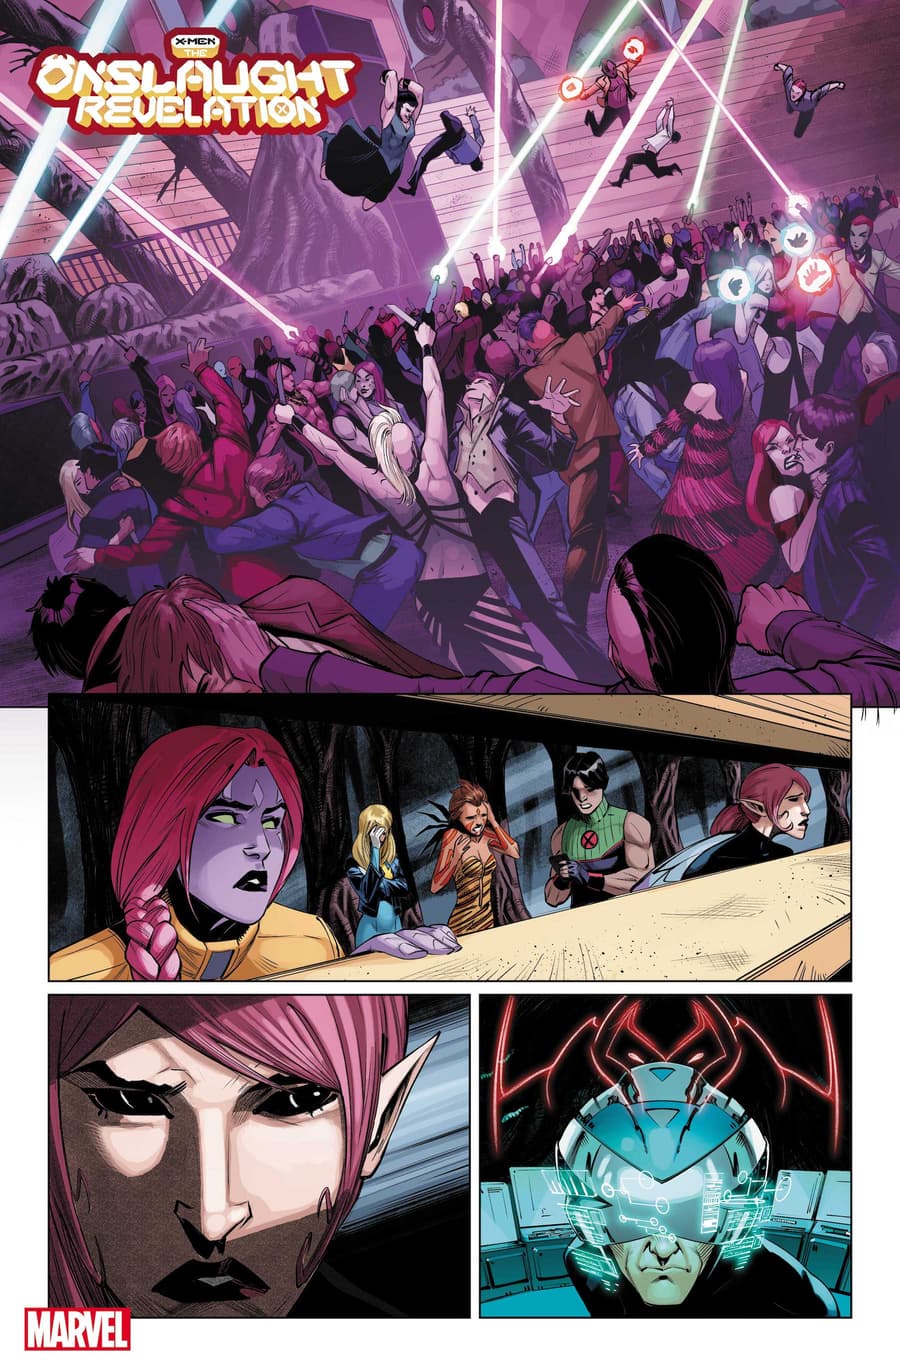 X-MEN: ONSLAUGHT REVELATION #1 preview art by Bob Quinn with colors by Java Tartaglia